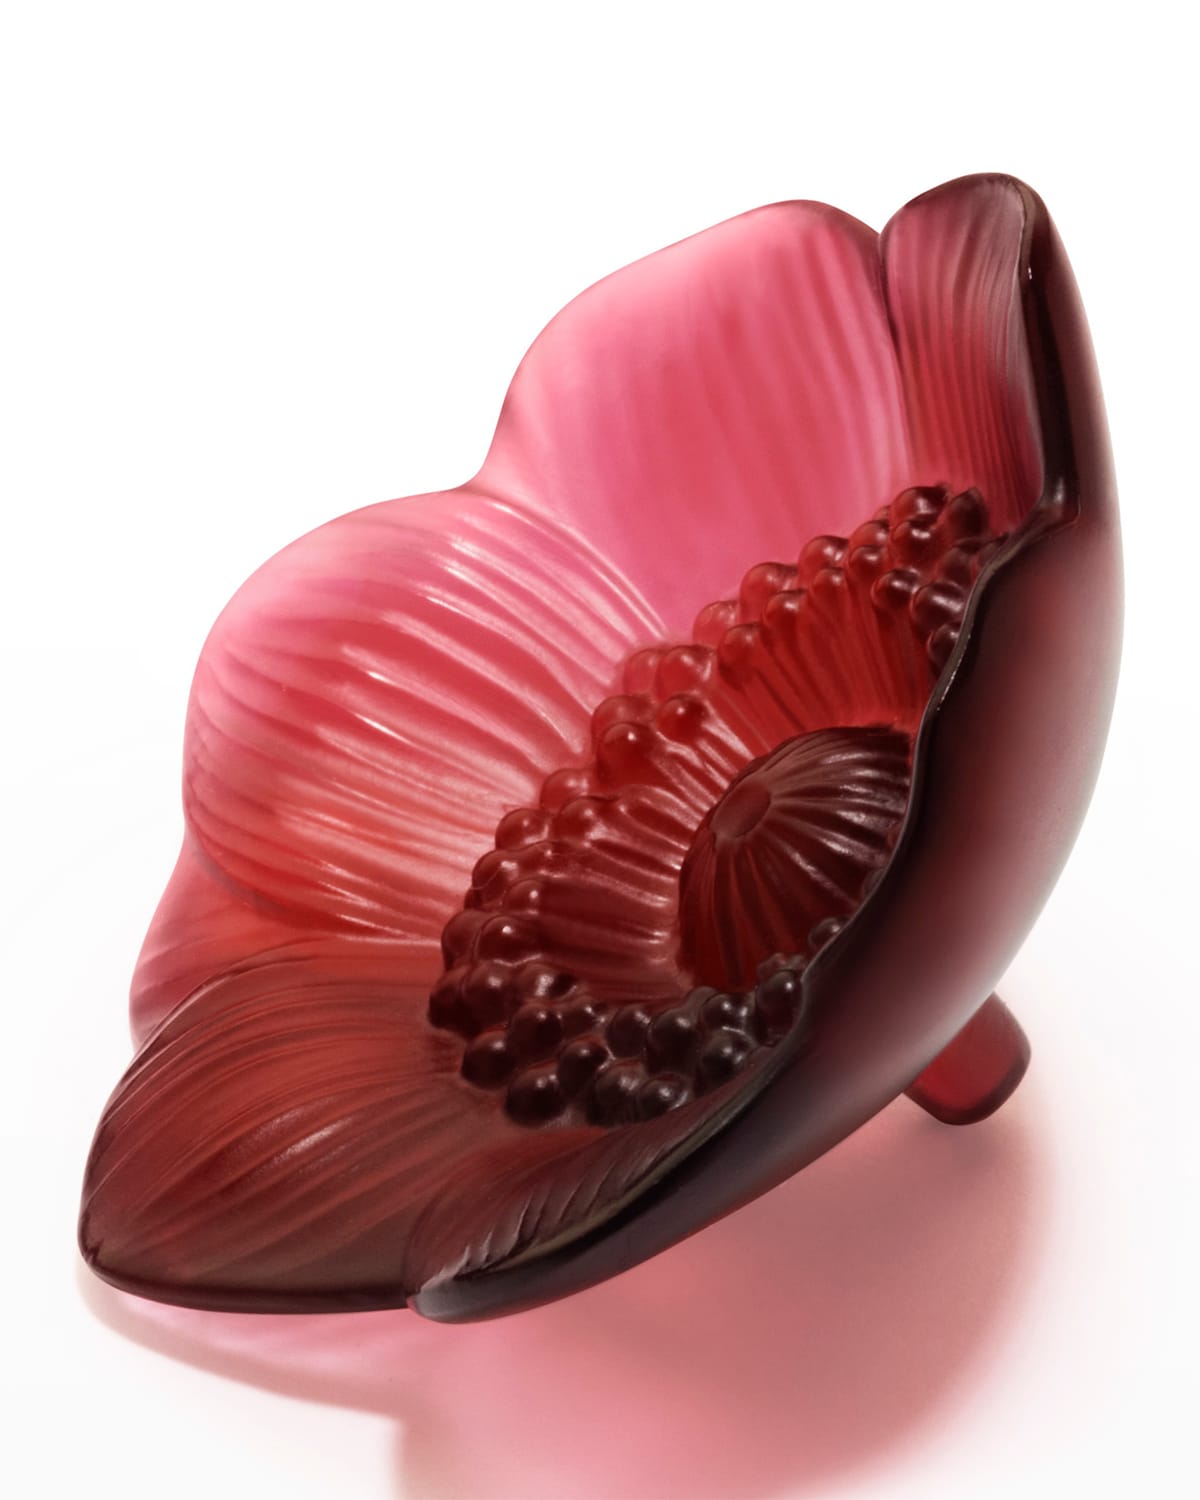 LALIQUE ANEMONE FIGURE, RED